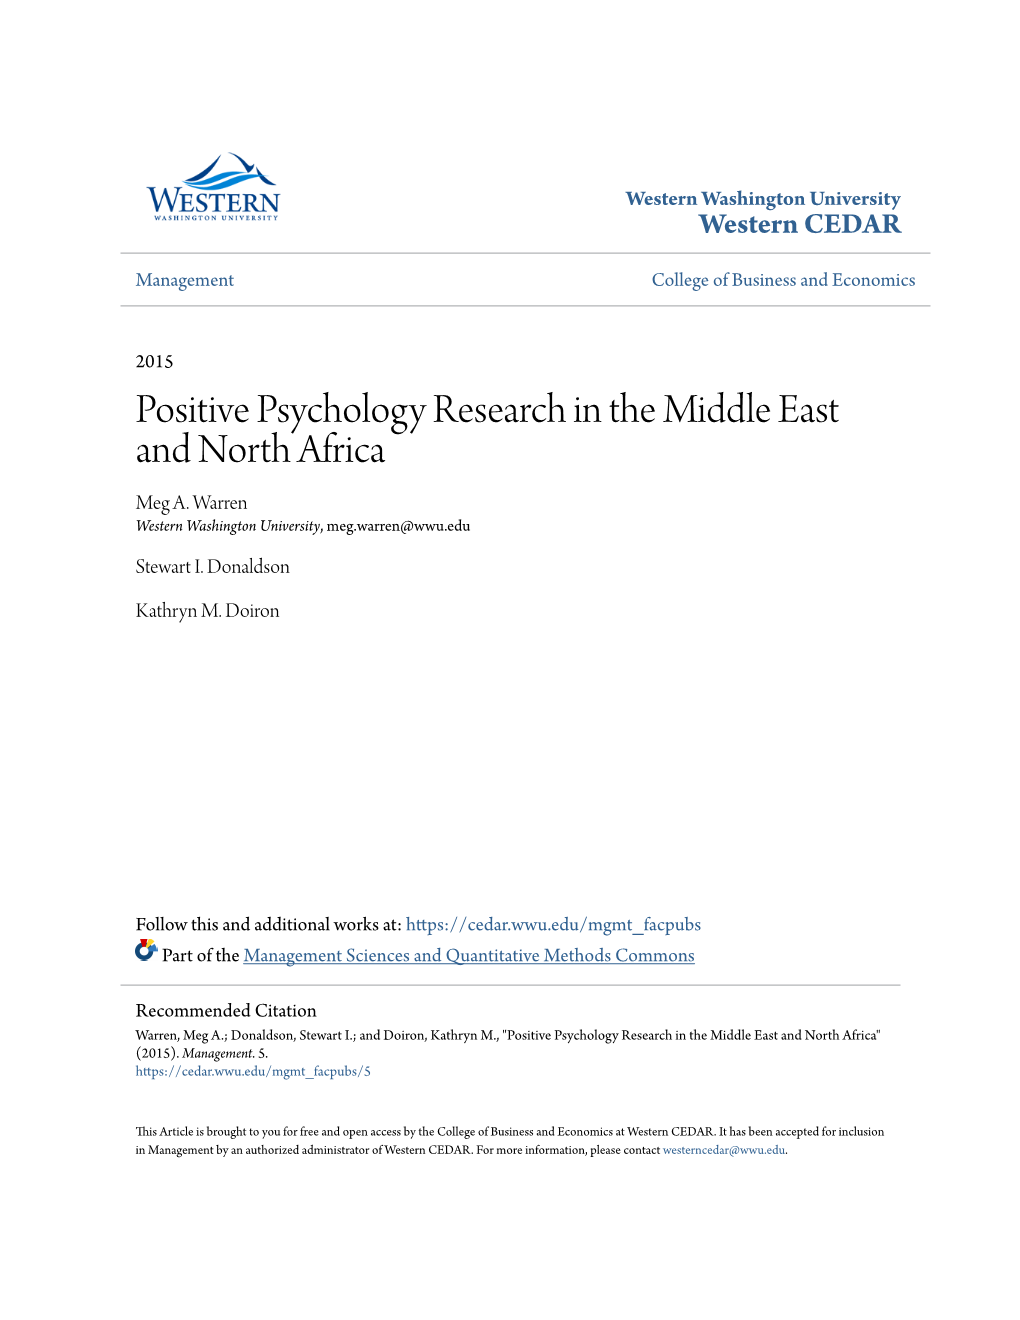 Positive Psychology Research in the Middle East and North Africa Meg A